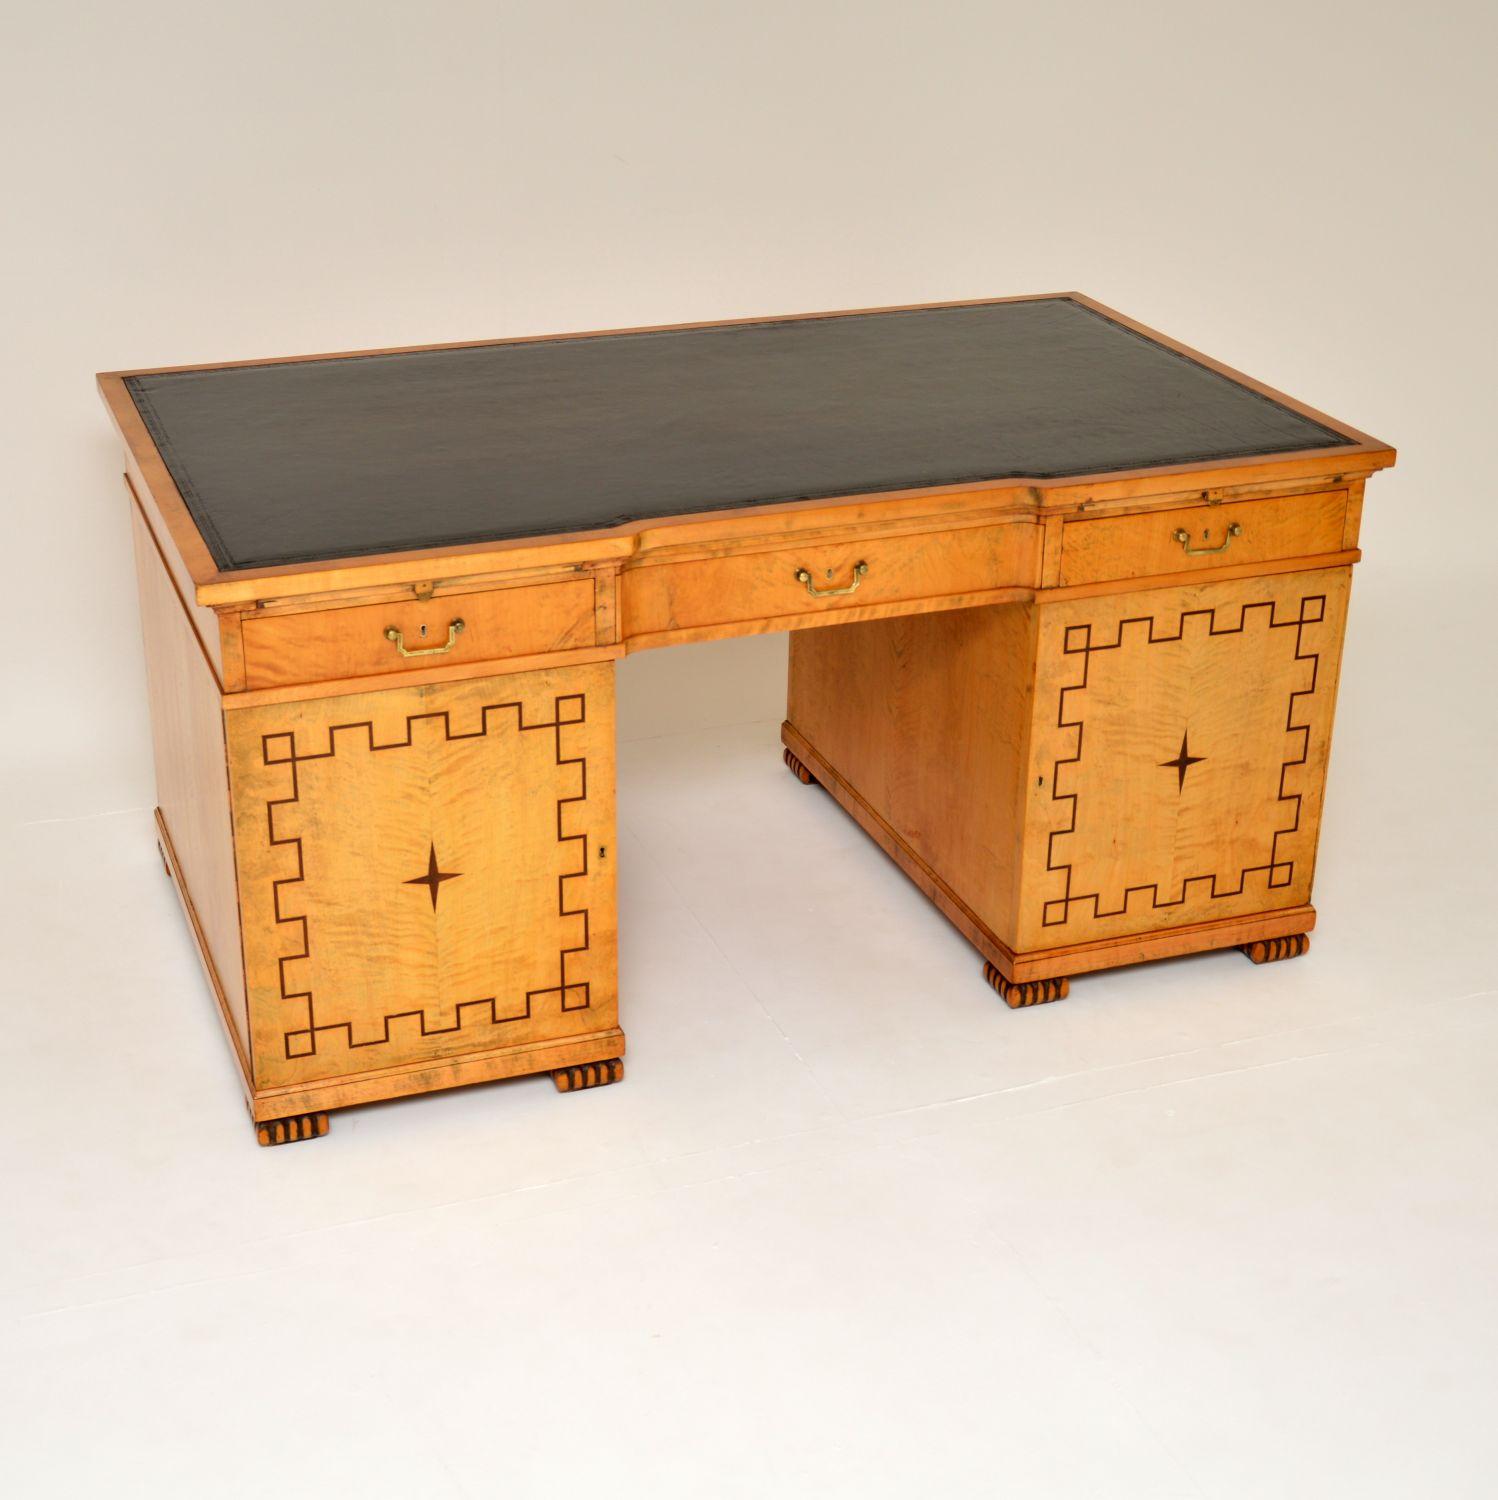 A magnificent antique satin birch Biedermeier leather top desk of the highest order. This was made in Sweden, it dates from around the 1880-1900 period.

It has a strong neoclassical influence, with lovely geometric patterns on the front and back of